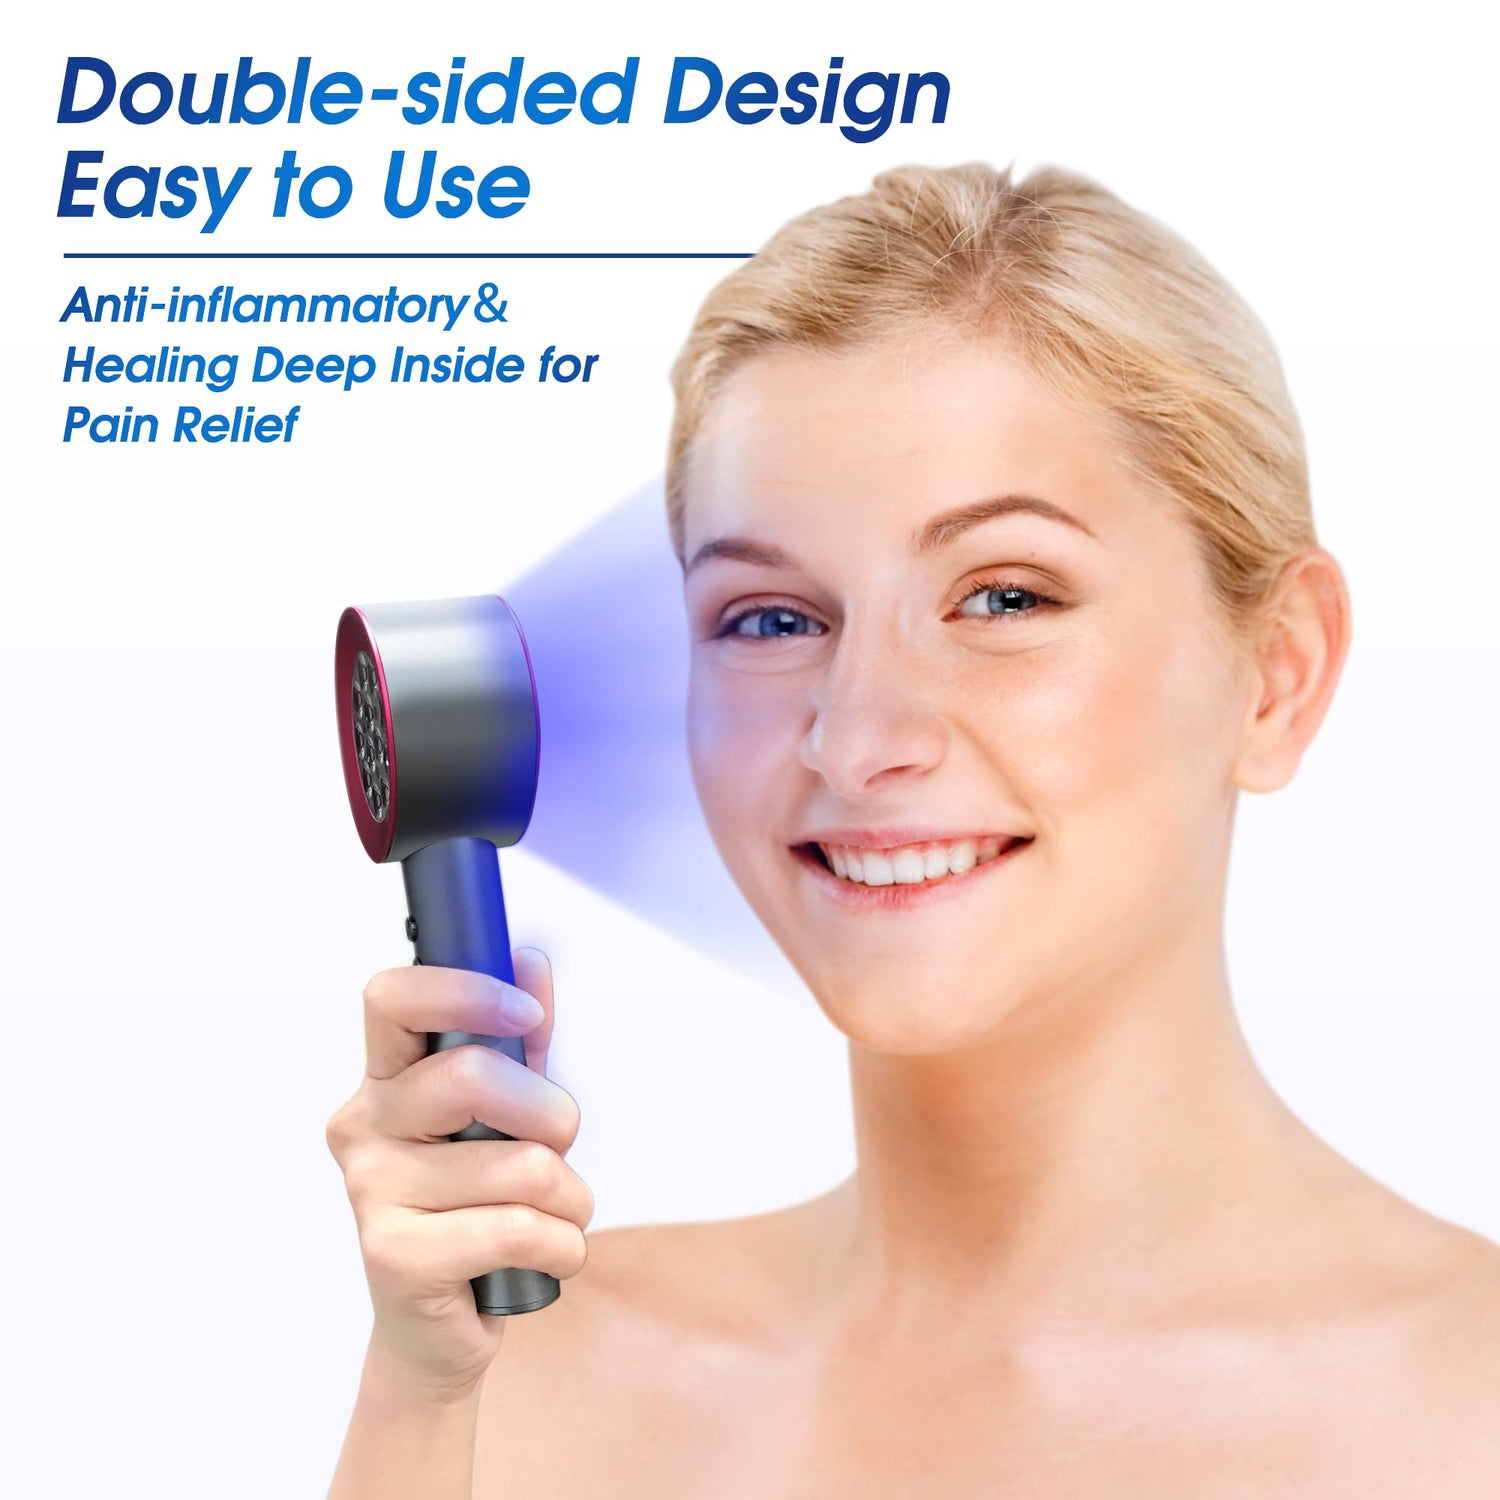 How are Red and Blue Light Therapy Devices Different?